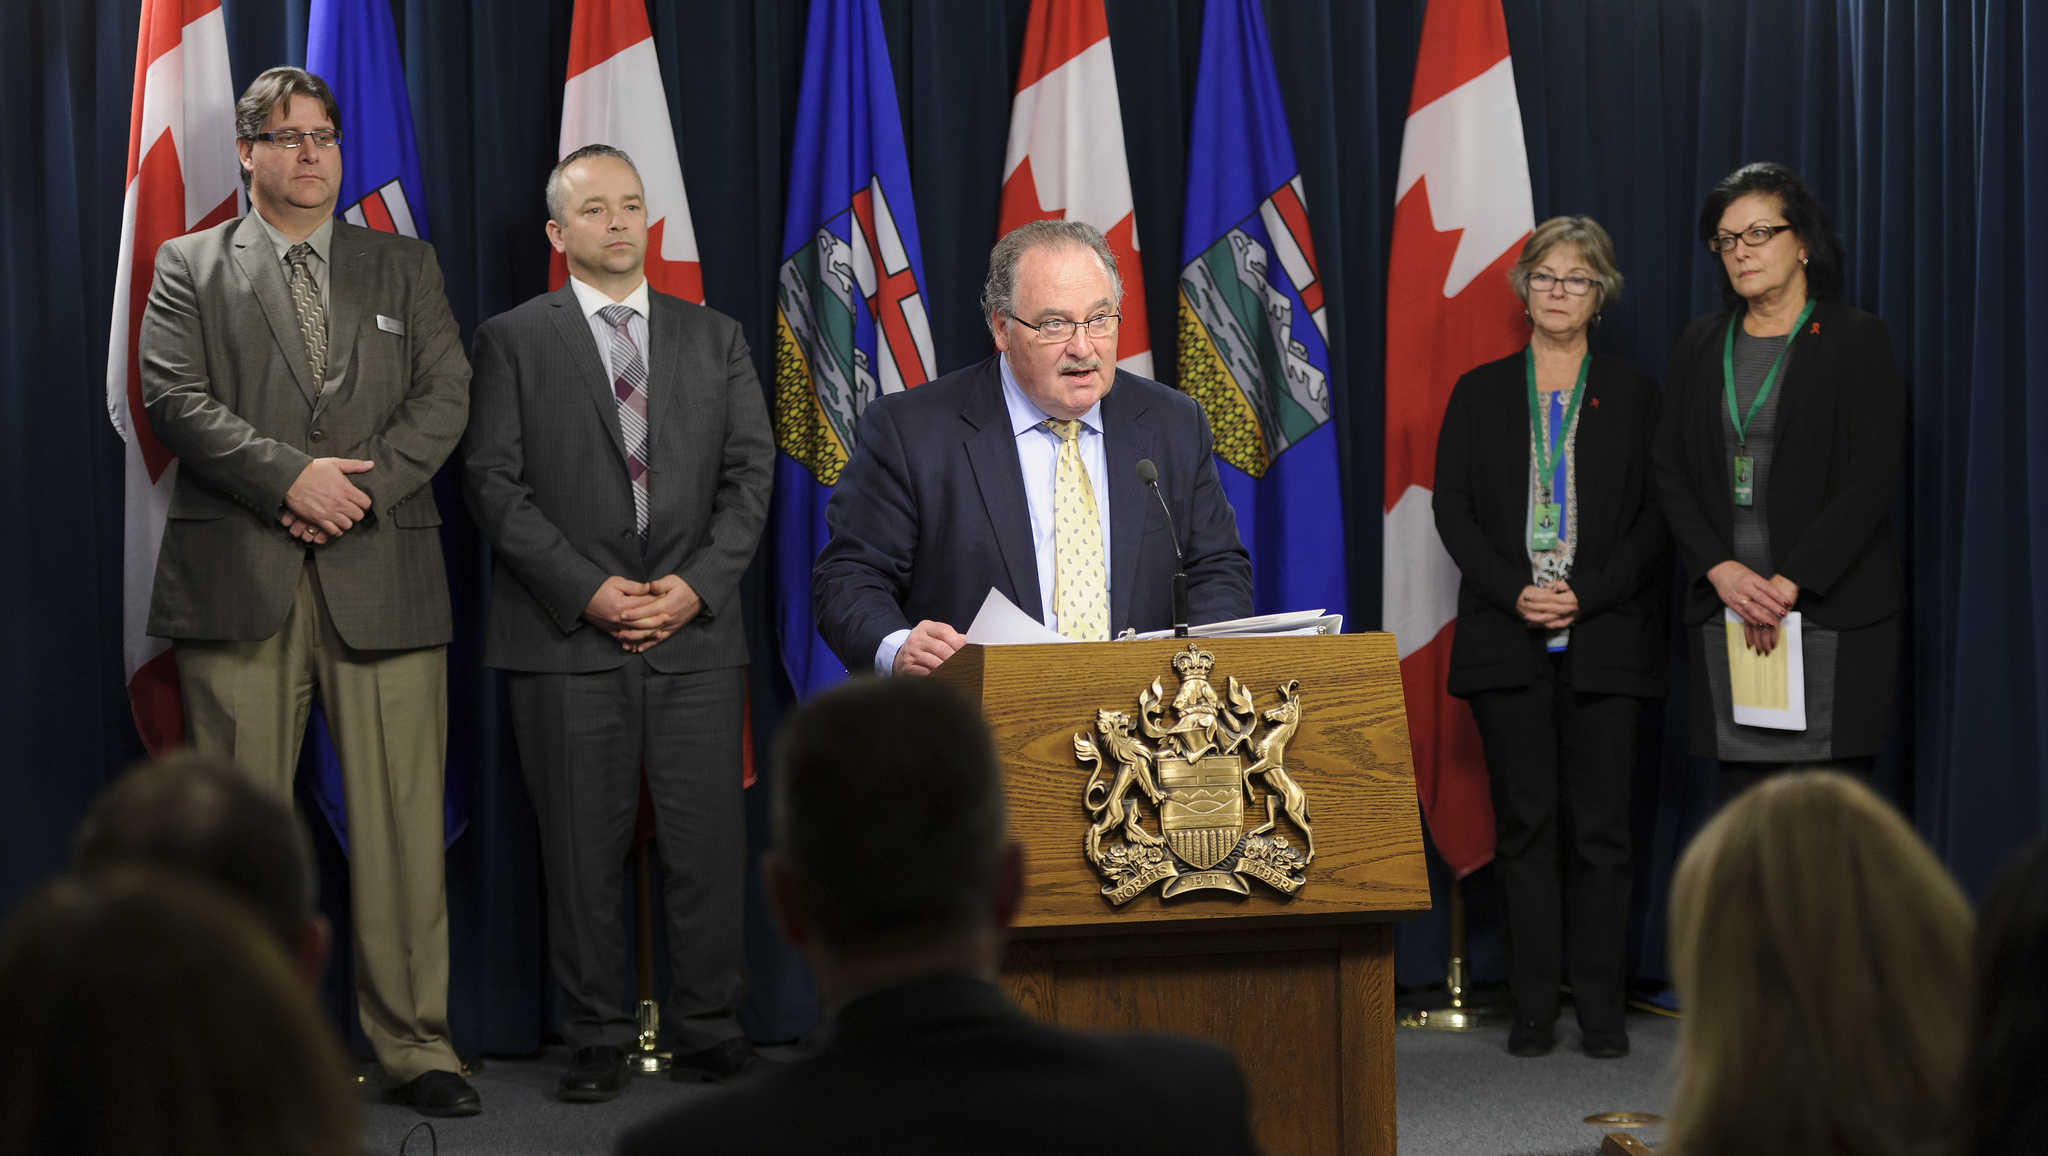 Alberta to Bolster Drug-impaired Driving Laws